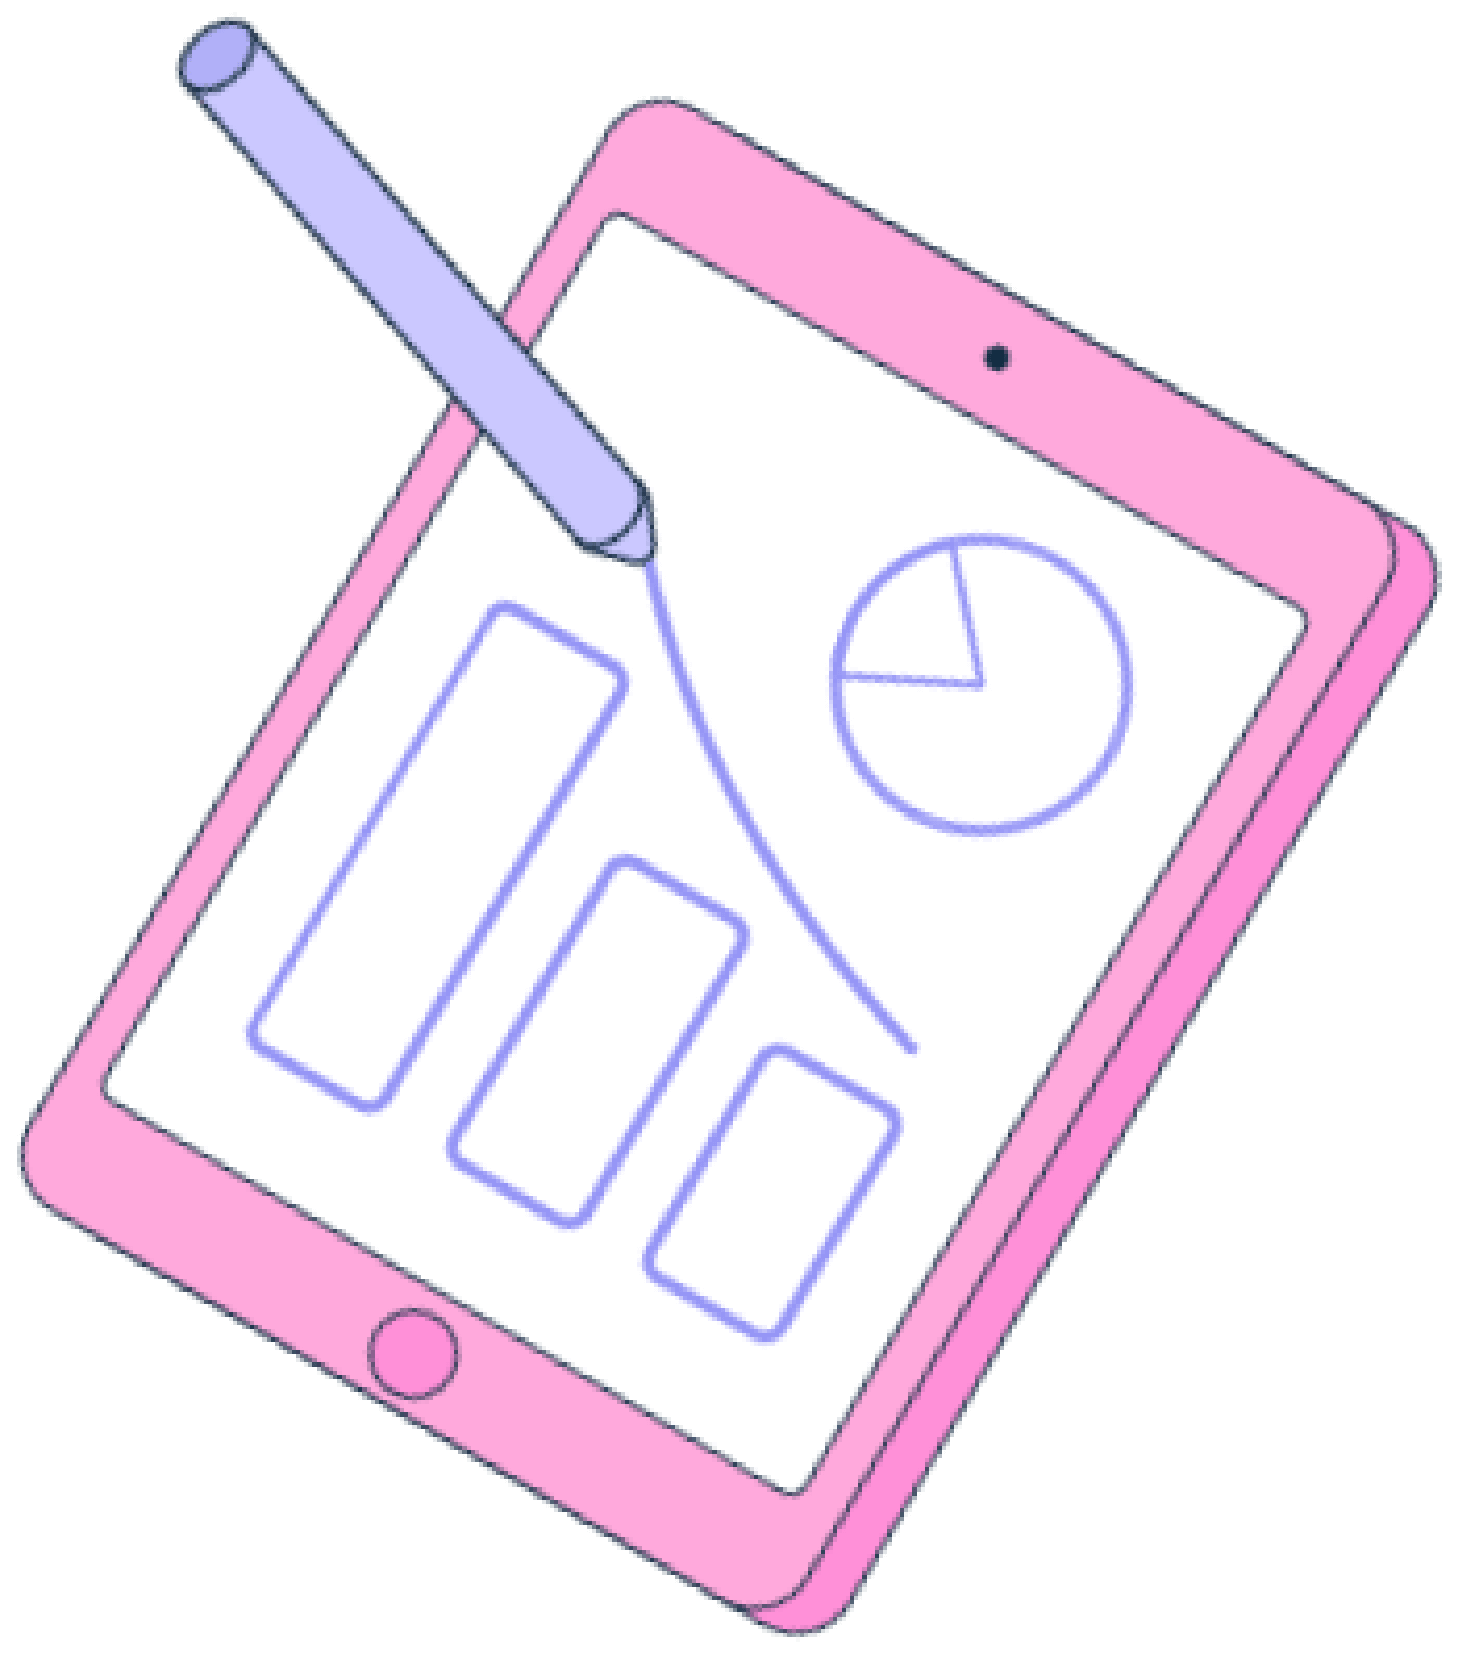 pink ipad with pen drawing